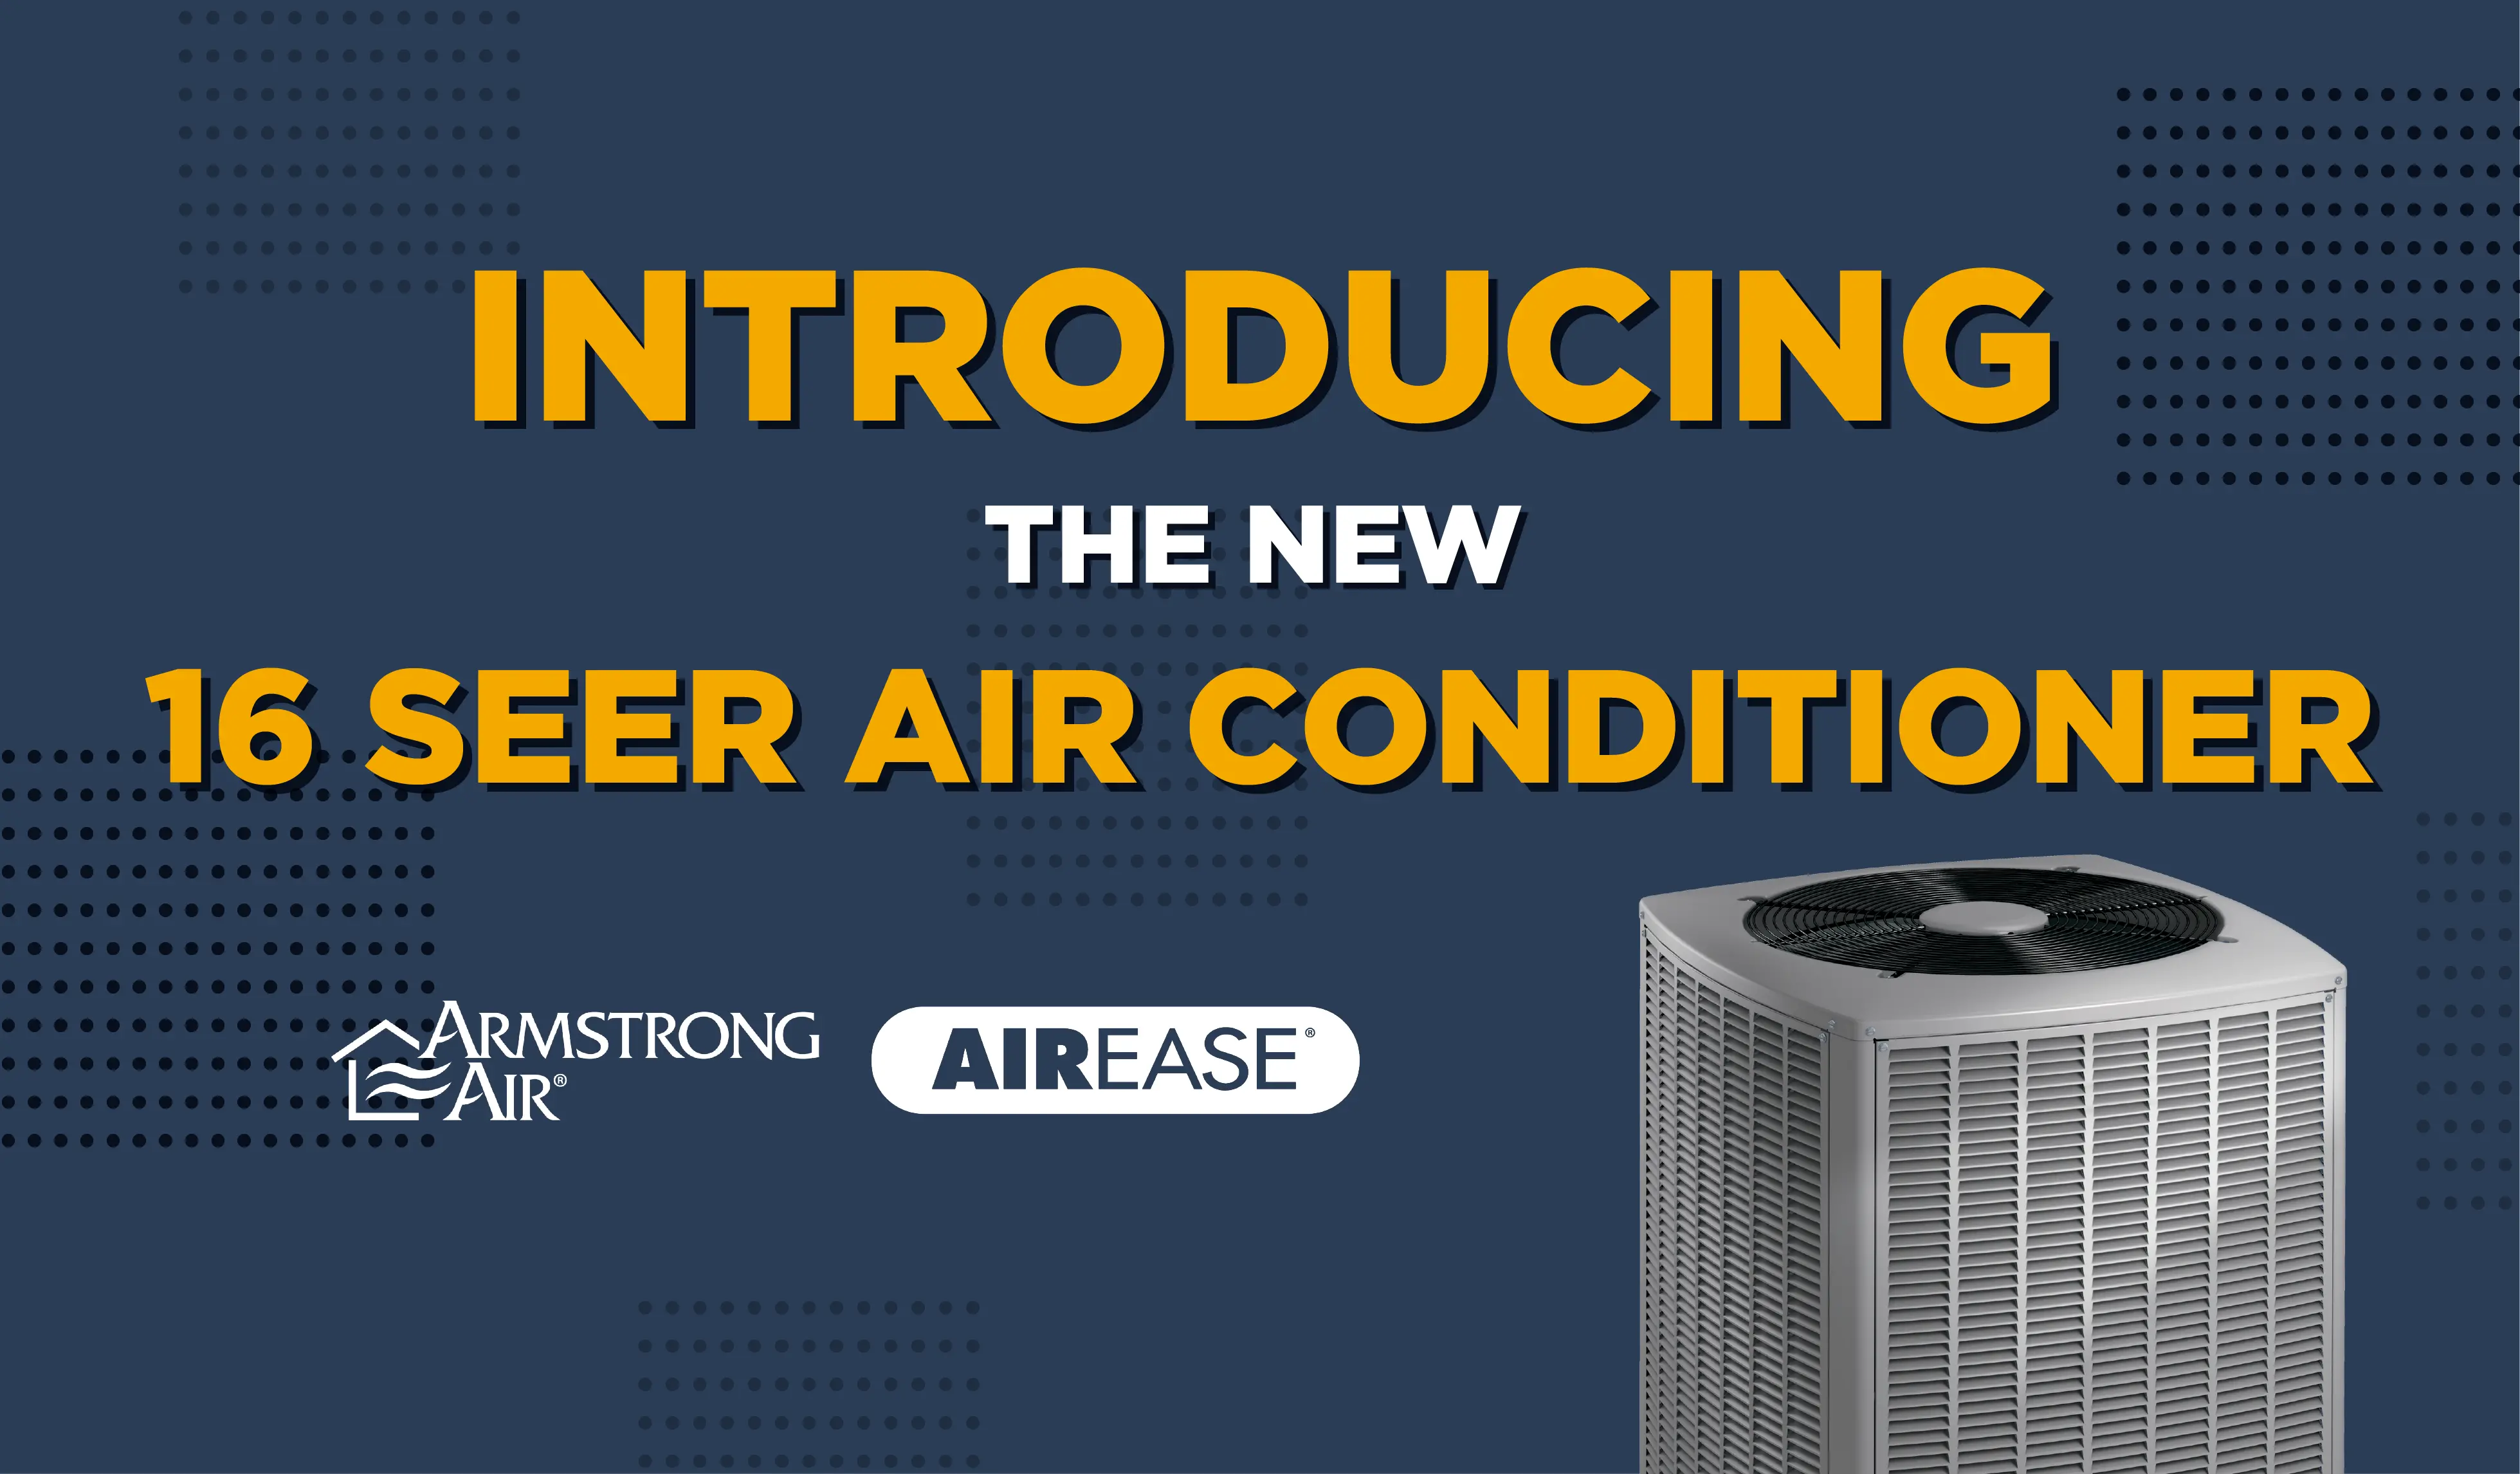  Allied Air Enterprises Adds New Entry-Level Solution with 16 SEER Air Conditioners for Northern U.S. and Canadian Markets 